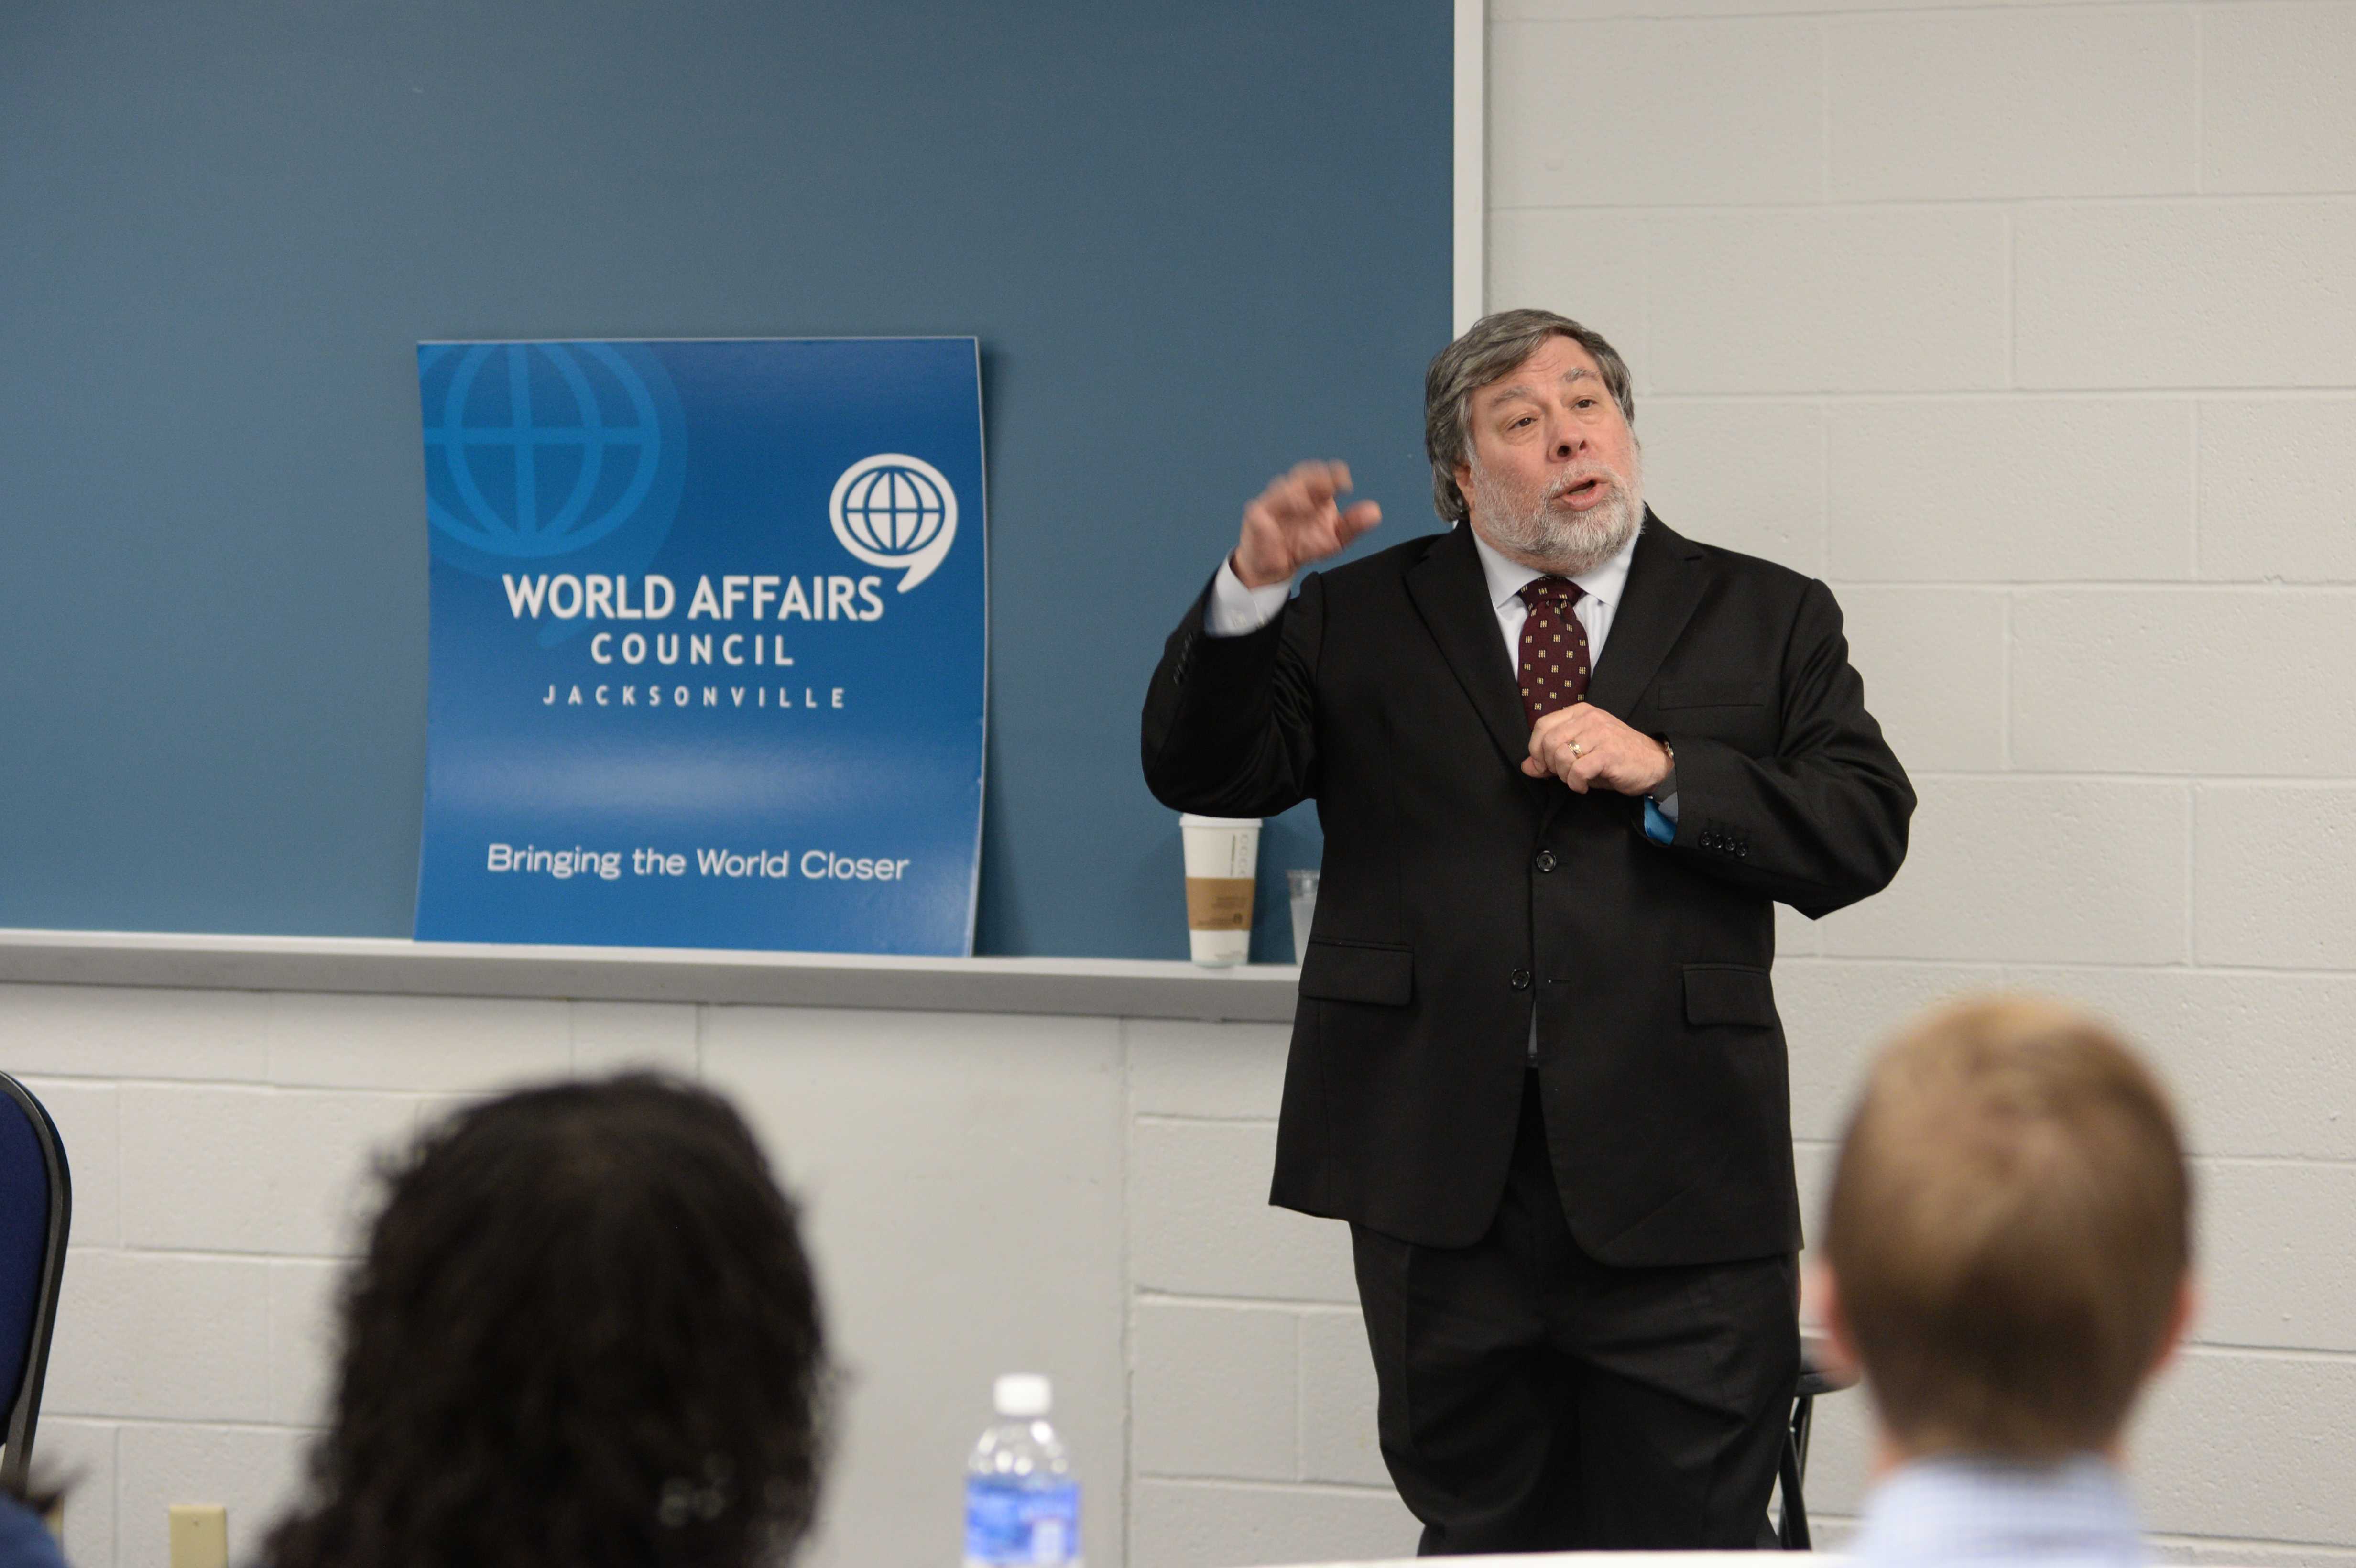 Wozniak speaking to a World Affairs Council group before the lecture. Photo by Jennifer Grissom